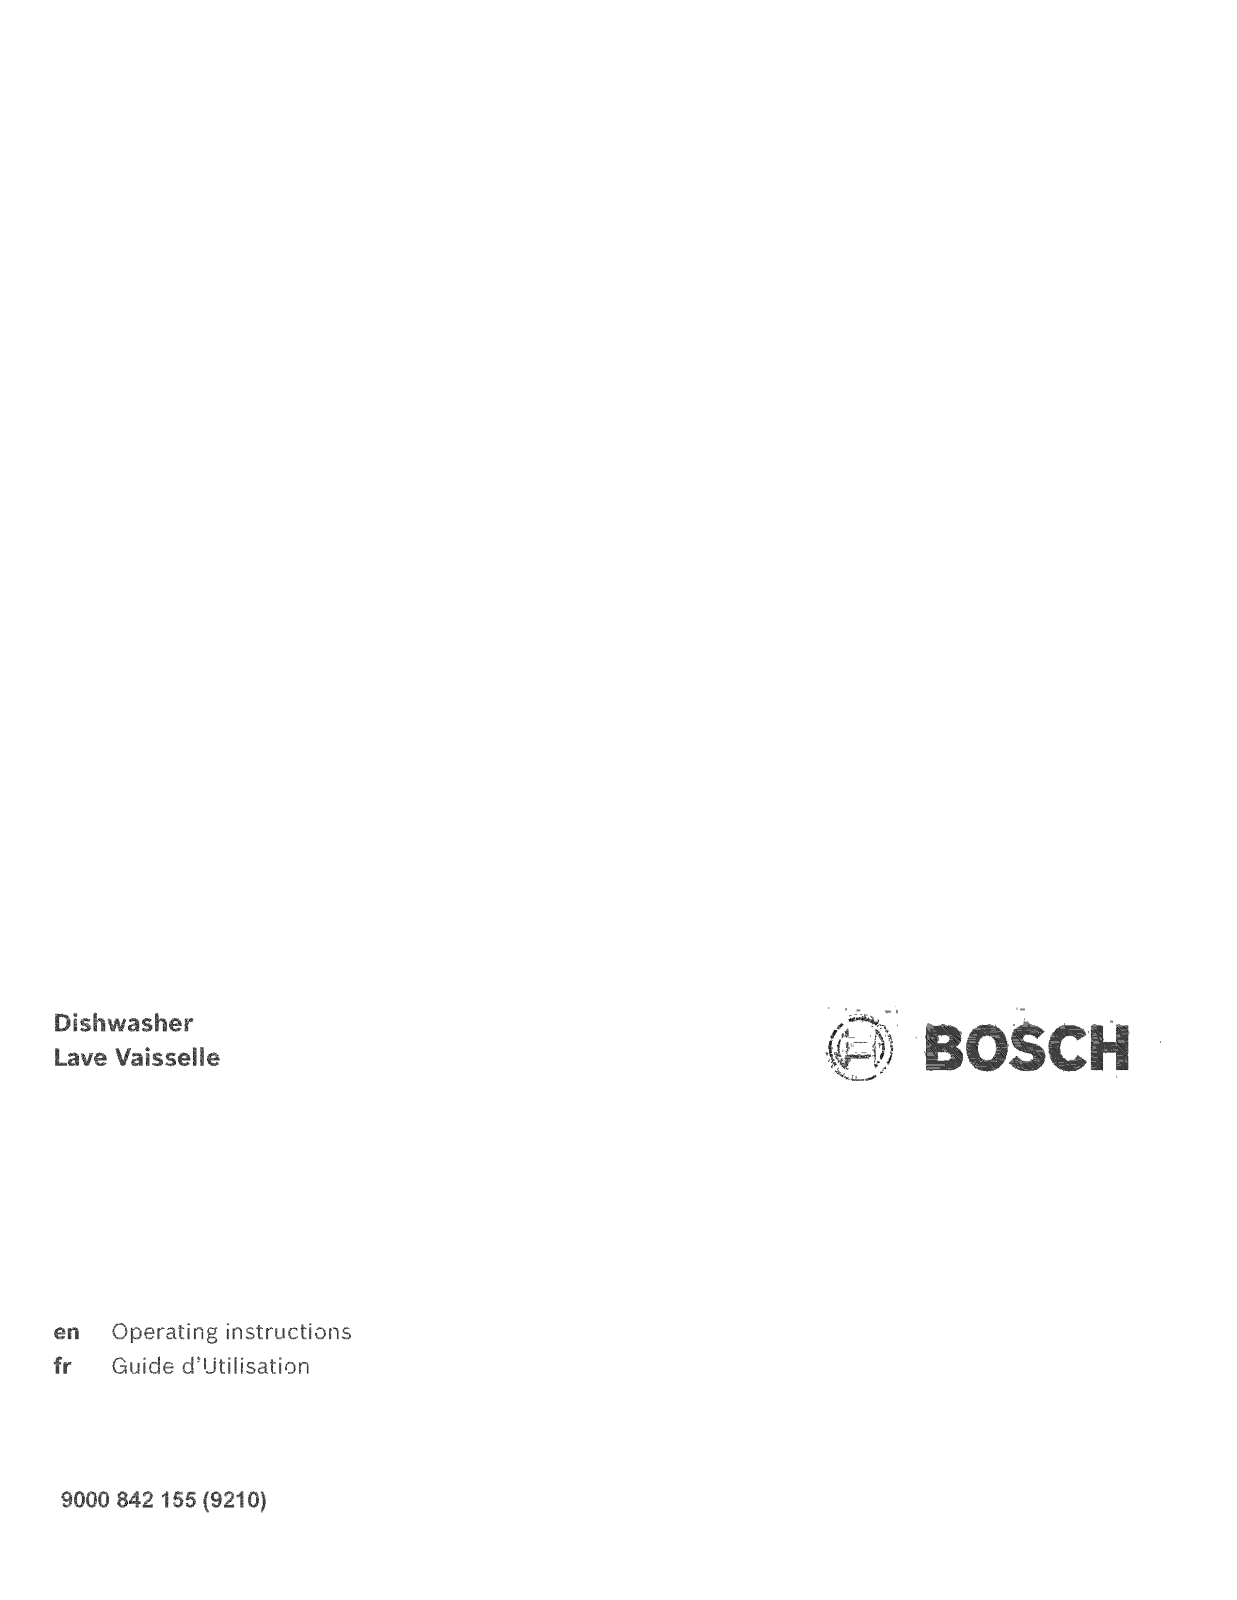 Bosch SGE63E06UC/82, SGE63E06UC/A3, SGE63E06UC/98, SGE63E06UC/93, SGE63E06UC/87 Owner’s Manual